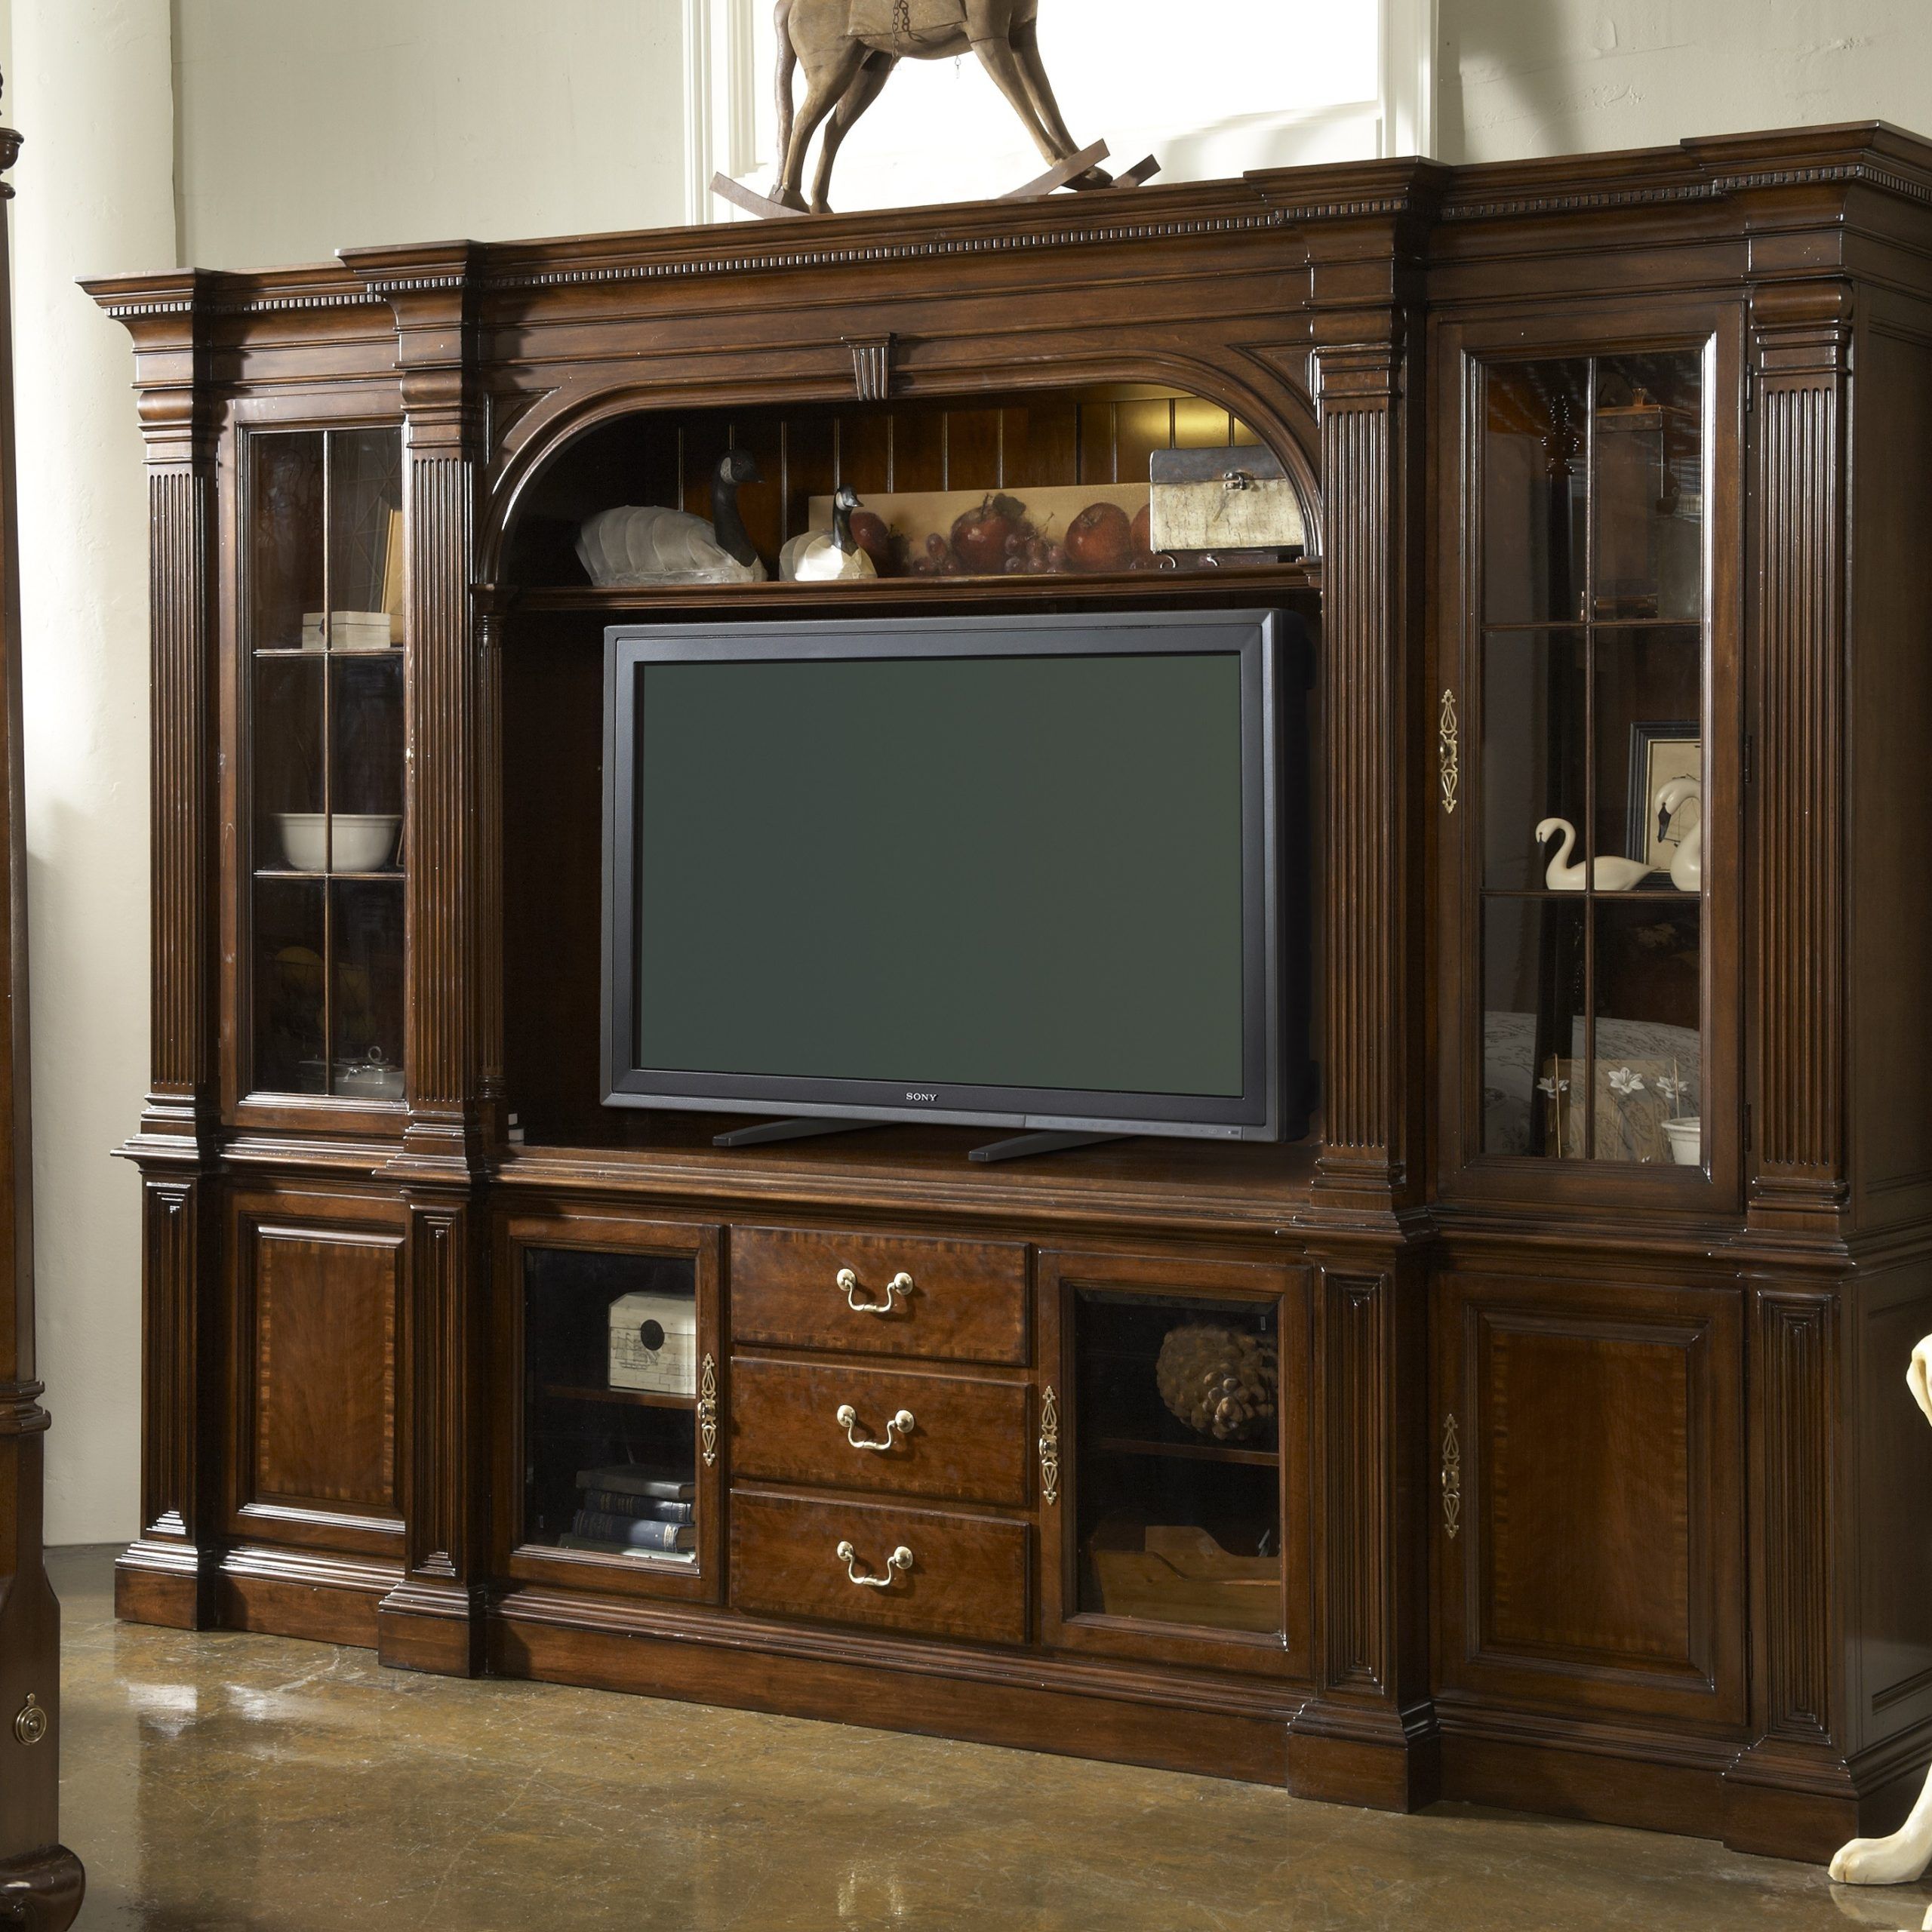 Cherry Wood Entertainment Center | Homesfeed Within Wide Entertainment Centers (View 17 of 20)